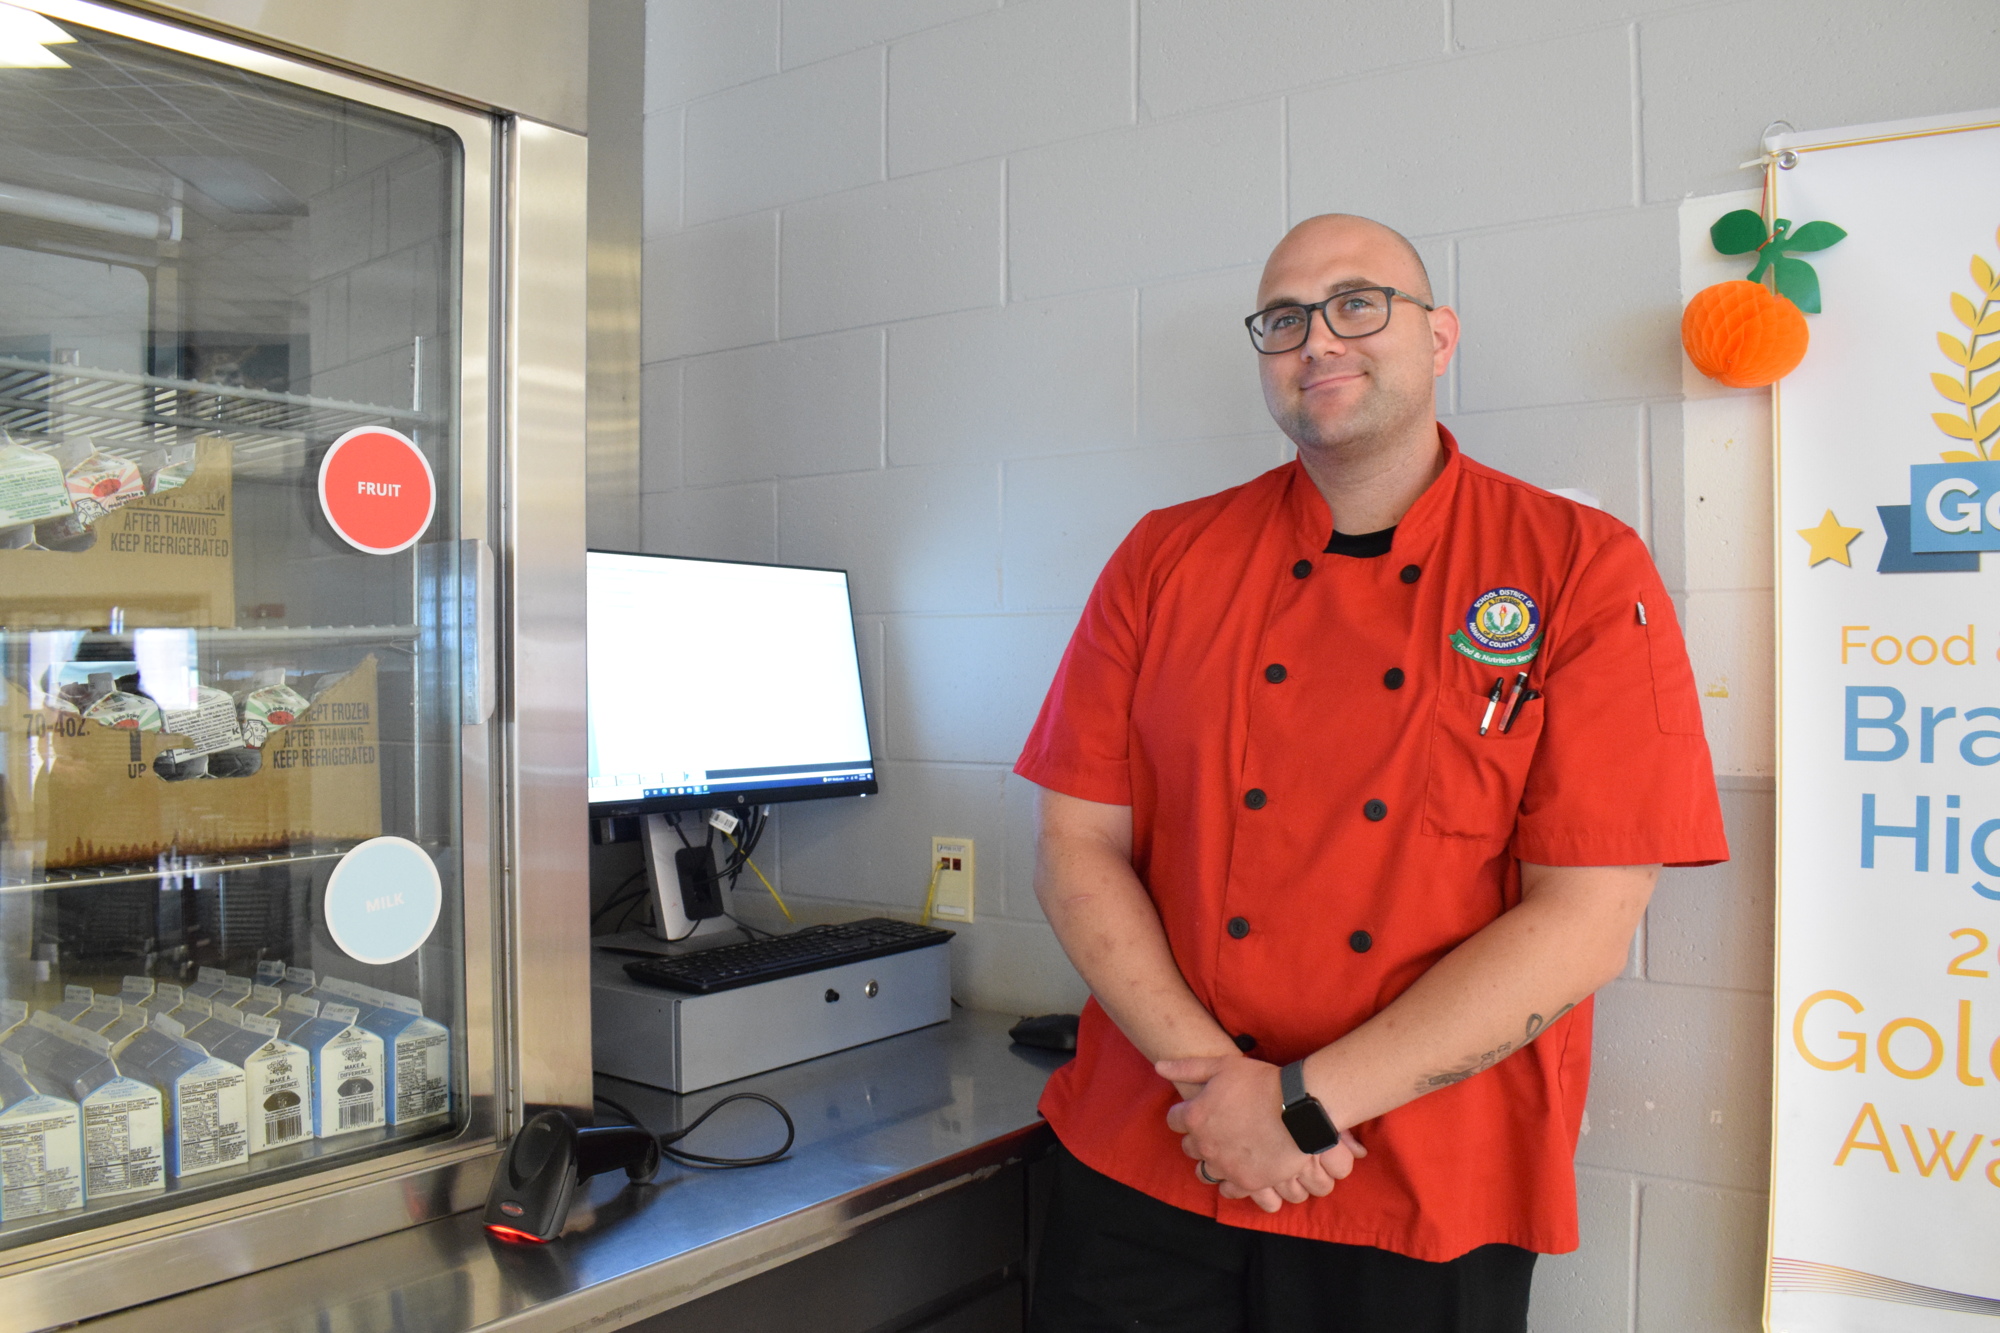 Seth Gwalthey, a cafeteria manager for the School District of Manatee County, loves working in schools rather than the restaurant industry.